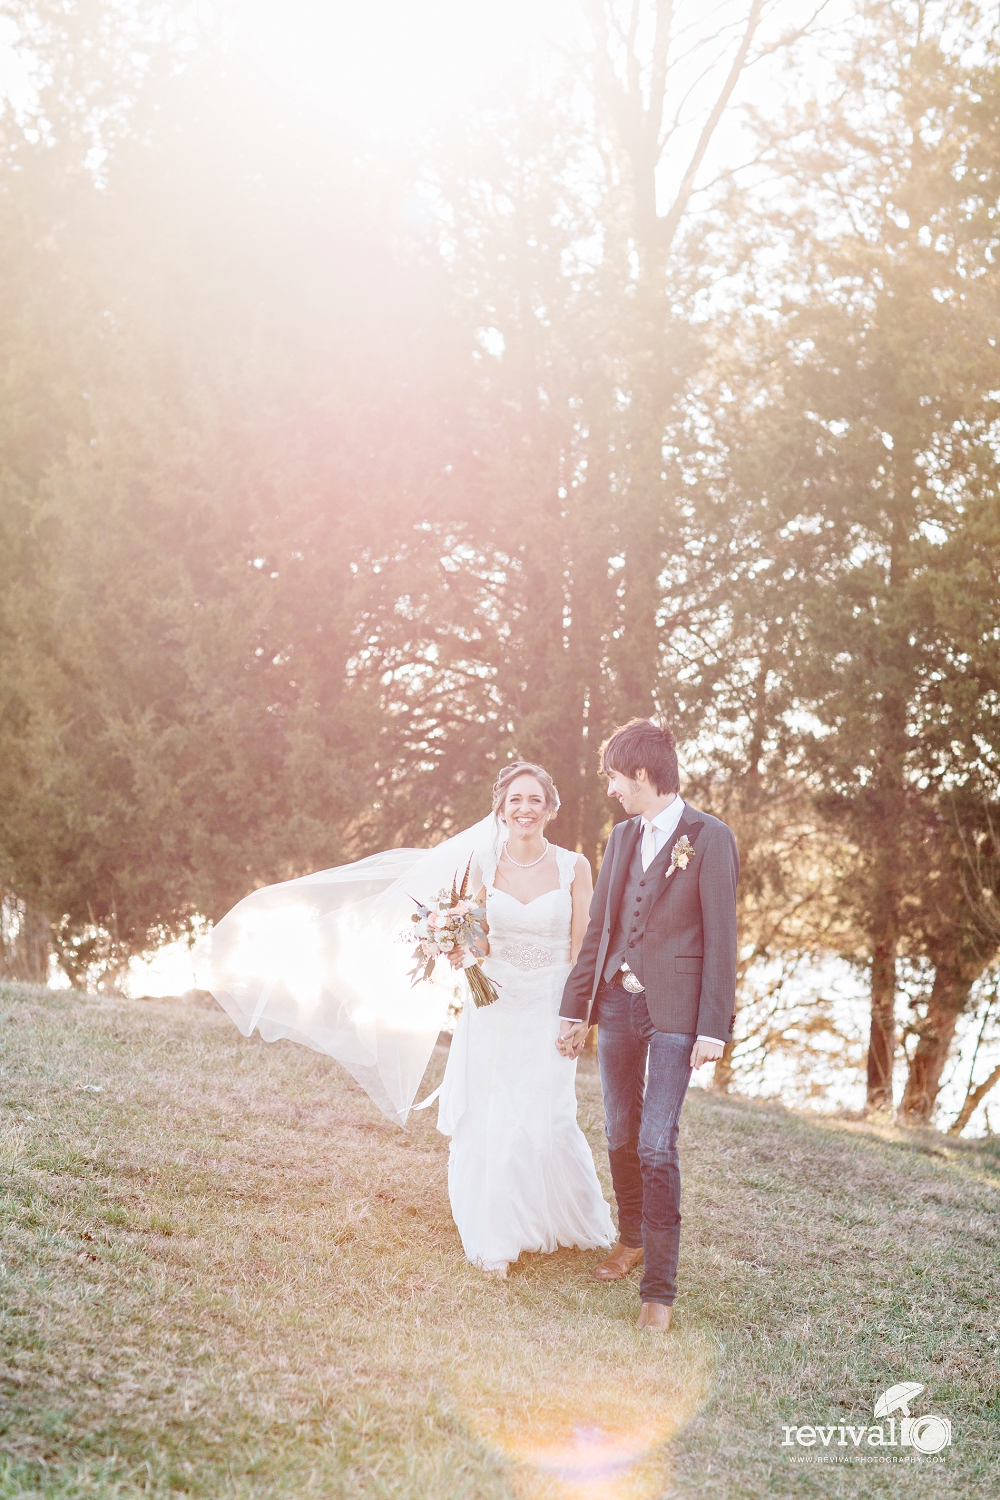 Emily + Mo Pitney's Wedding Day Photography by Revival Photography NC Wedding Photographers www.revivalphotography.com